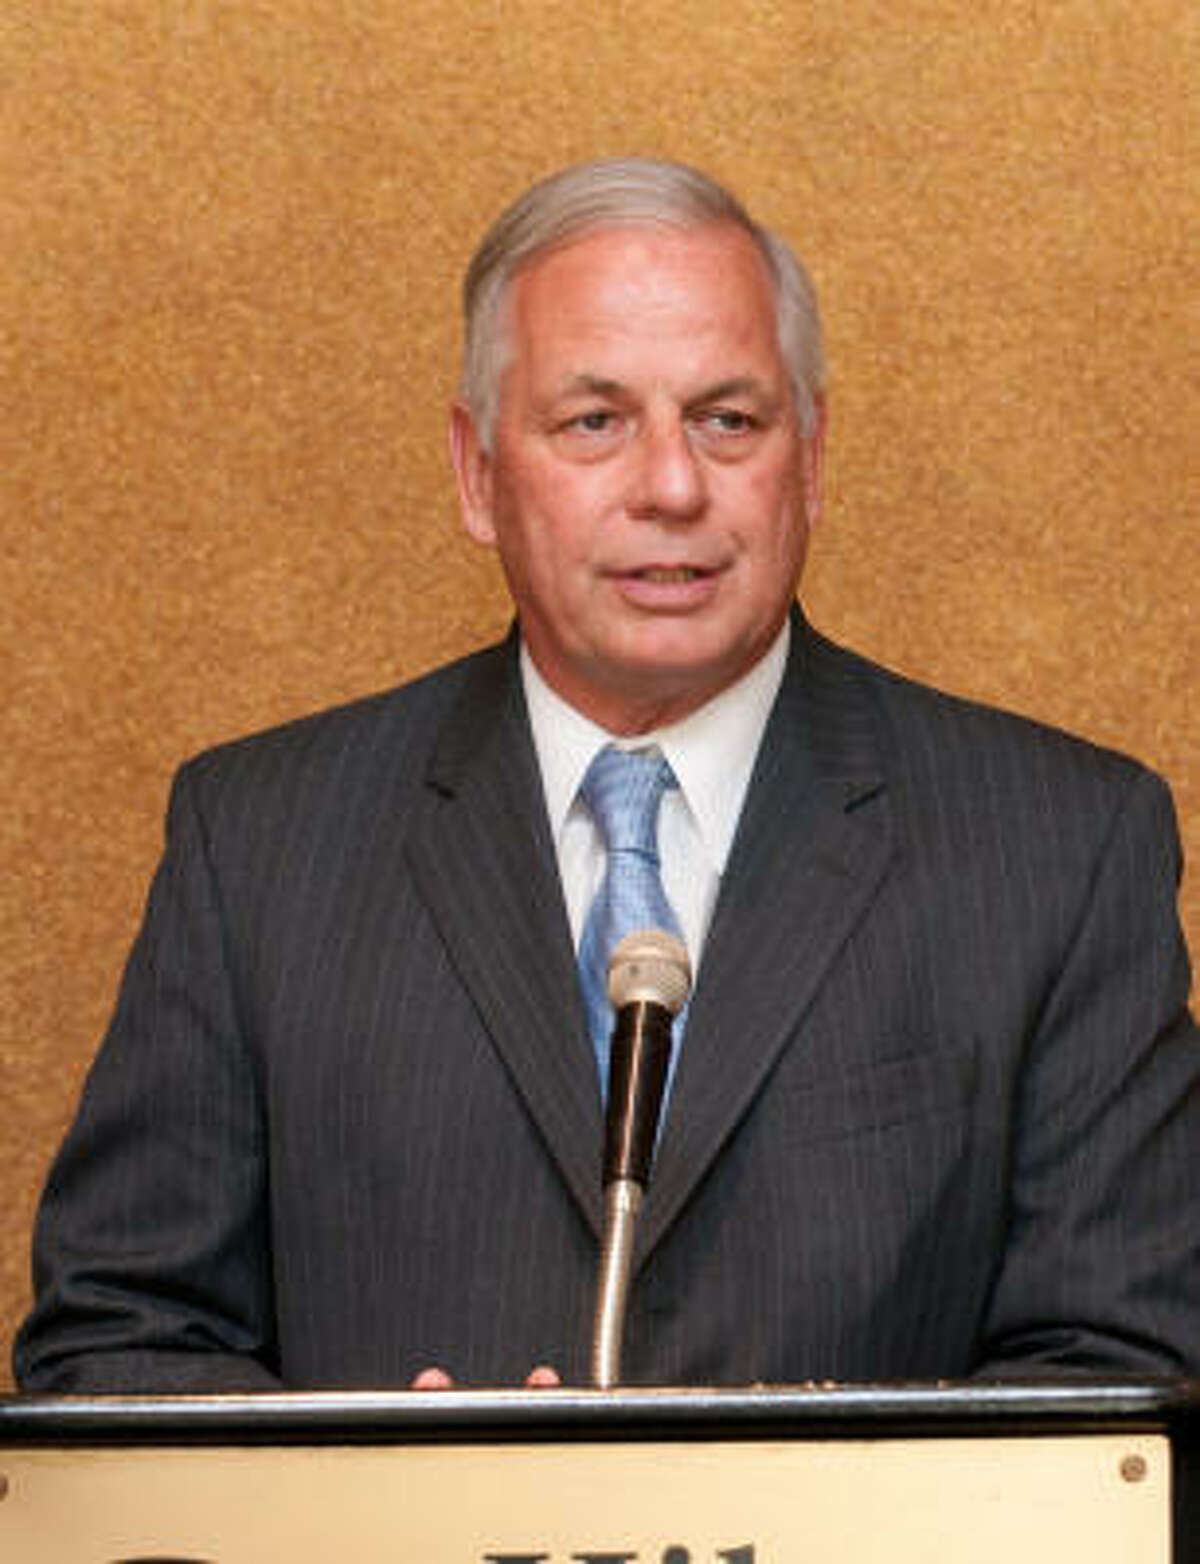 Rep. Gene Green has won successive elections since 1972.